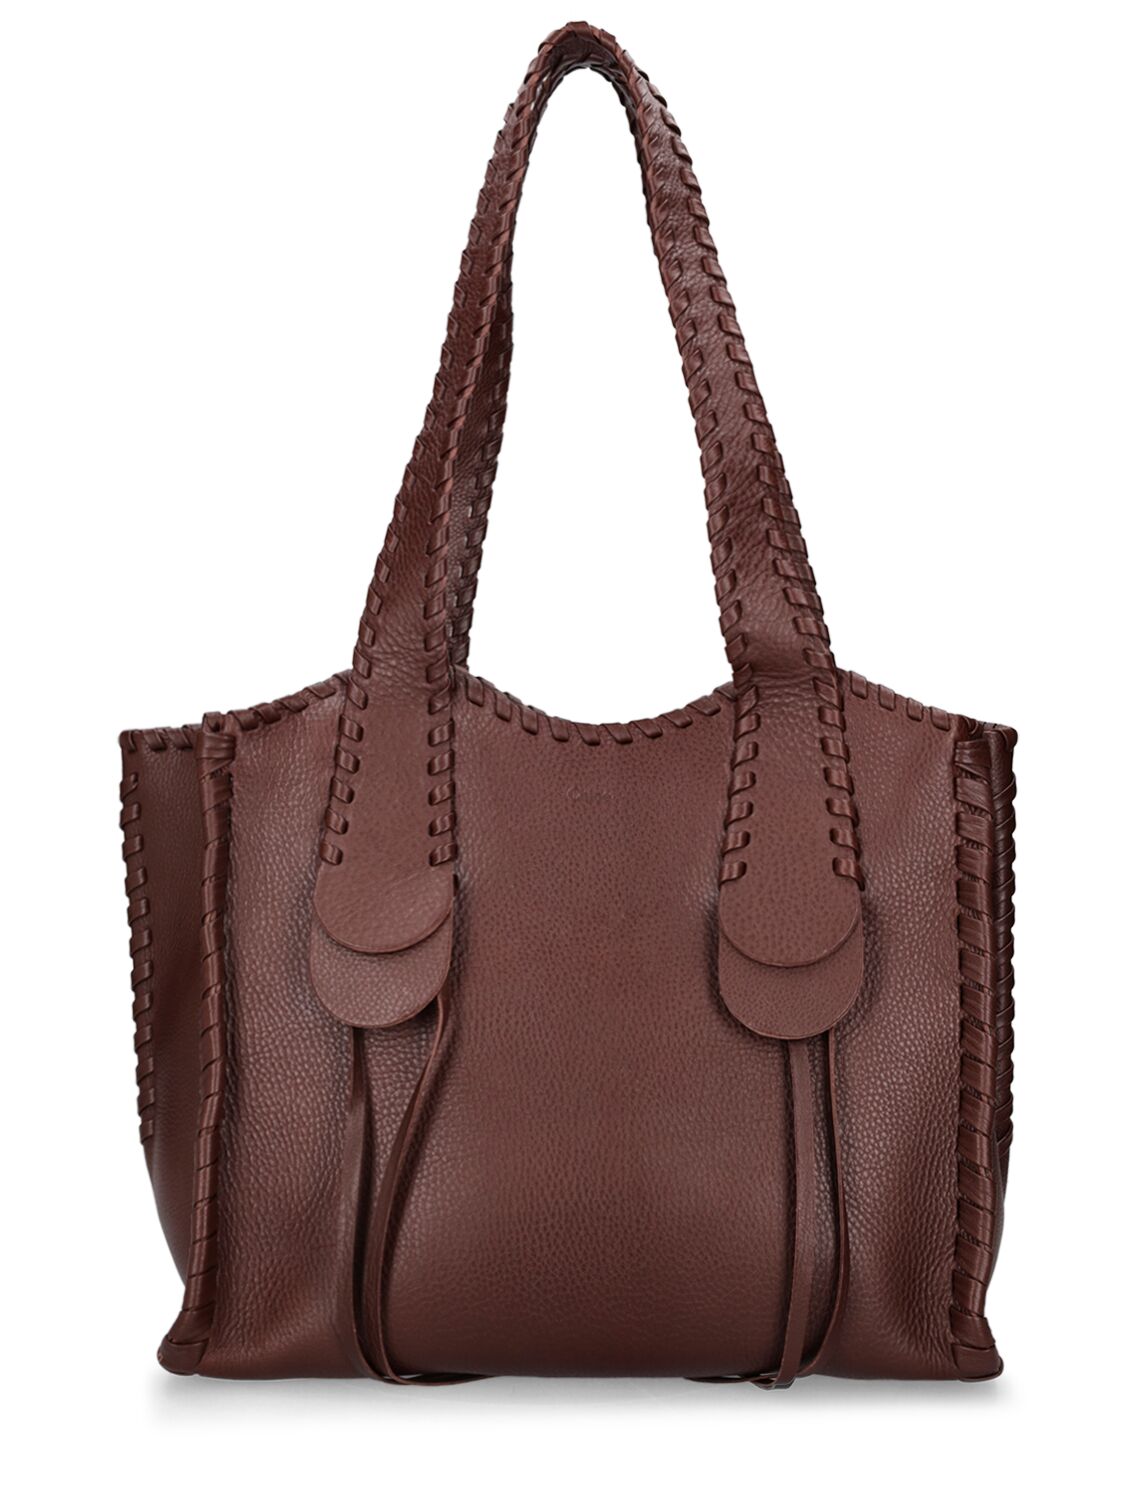 Chloé Medium Mony Leather Tote Bag In Chocolate